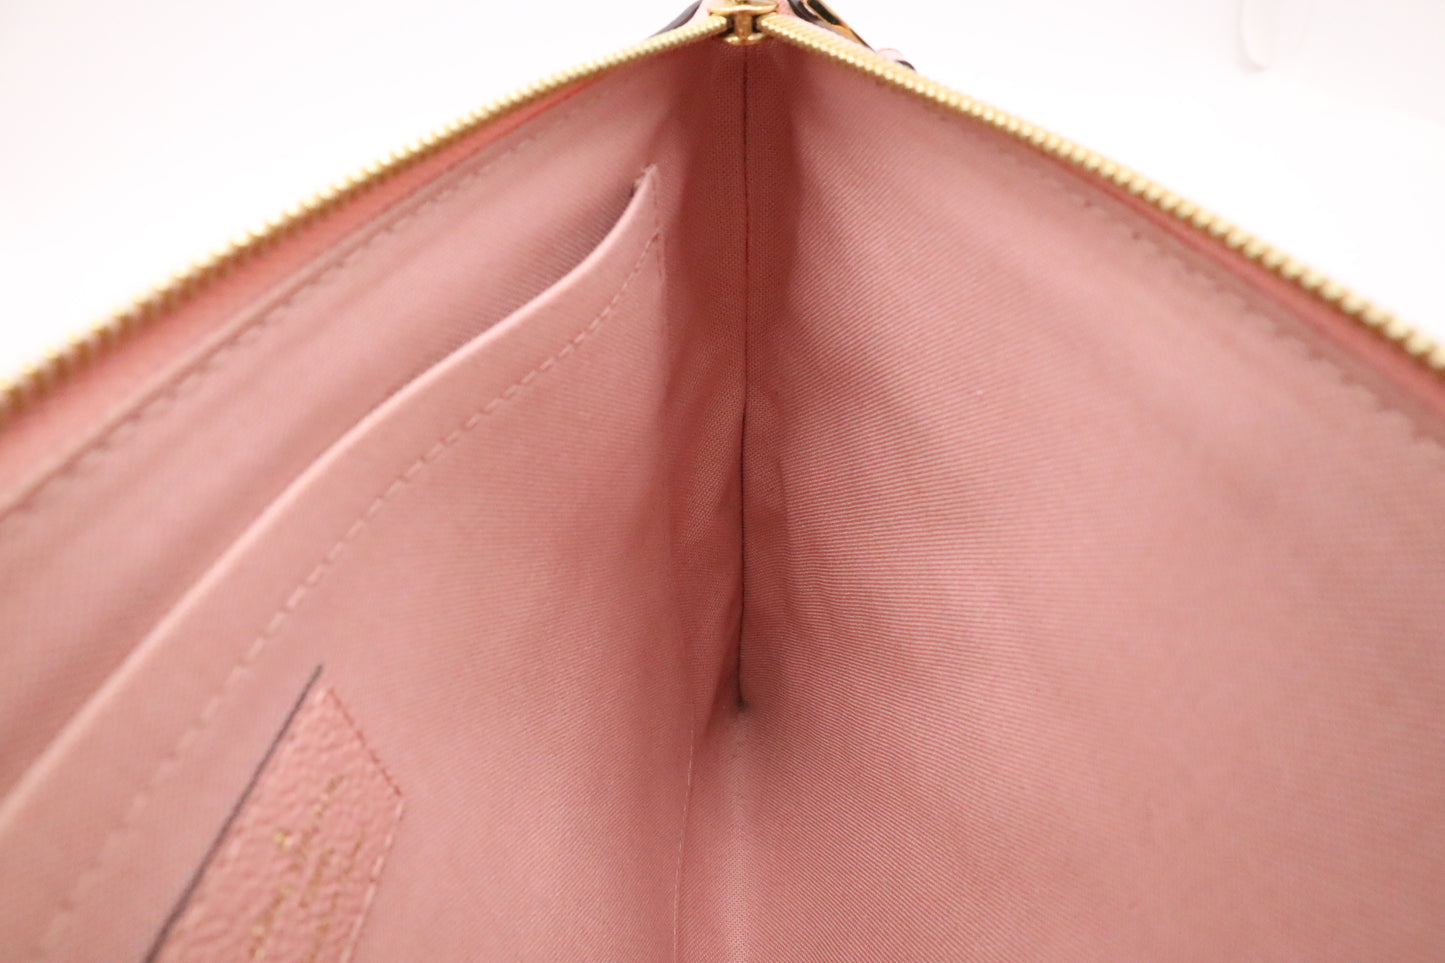 Louis Vuitton Daily Pouch in Pink Empreinte Leather